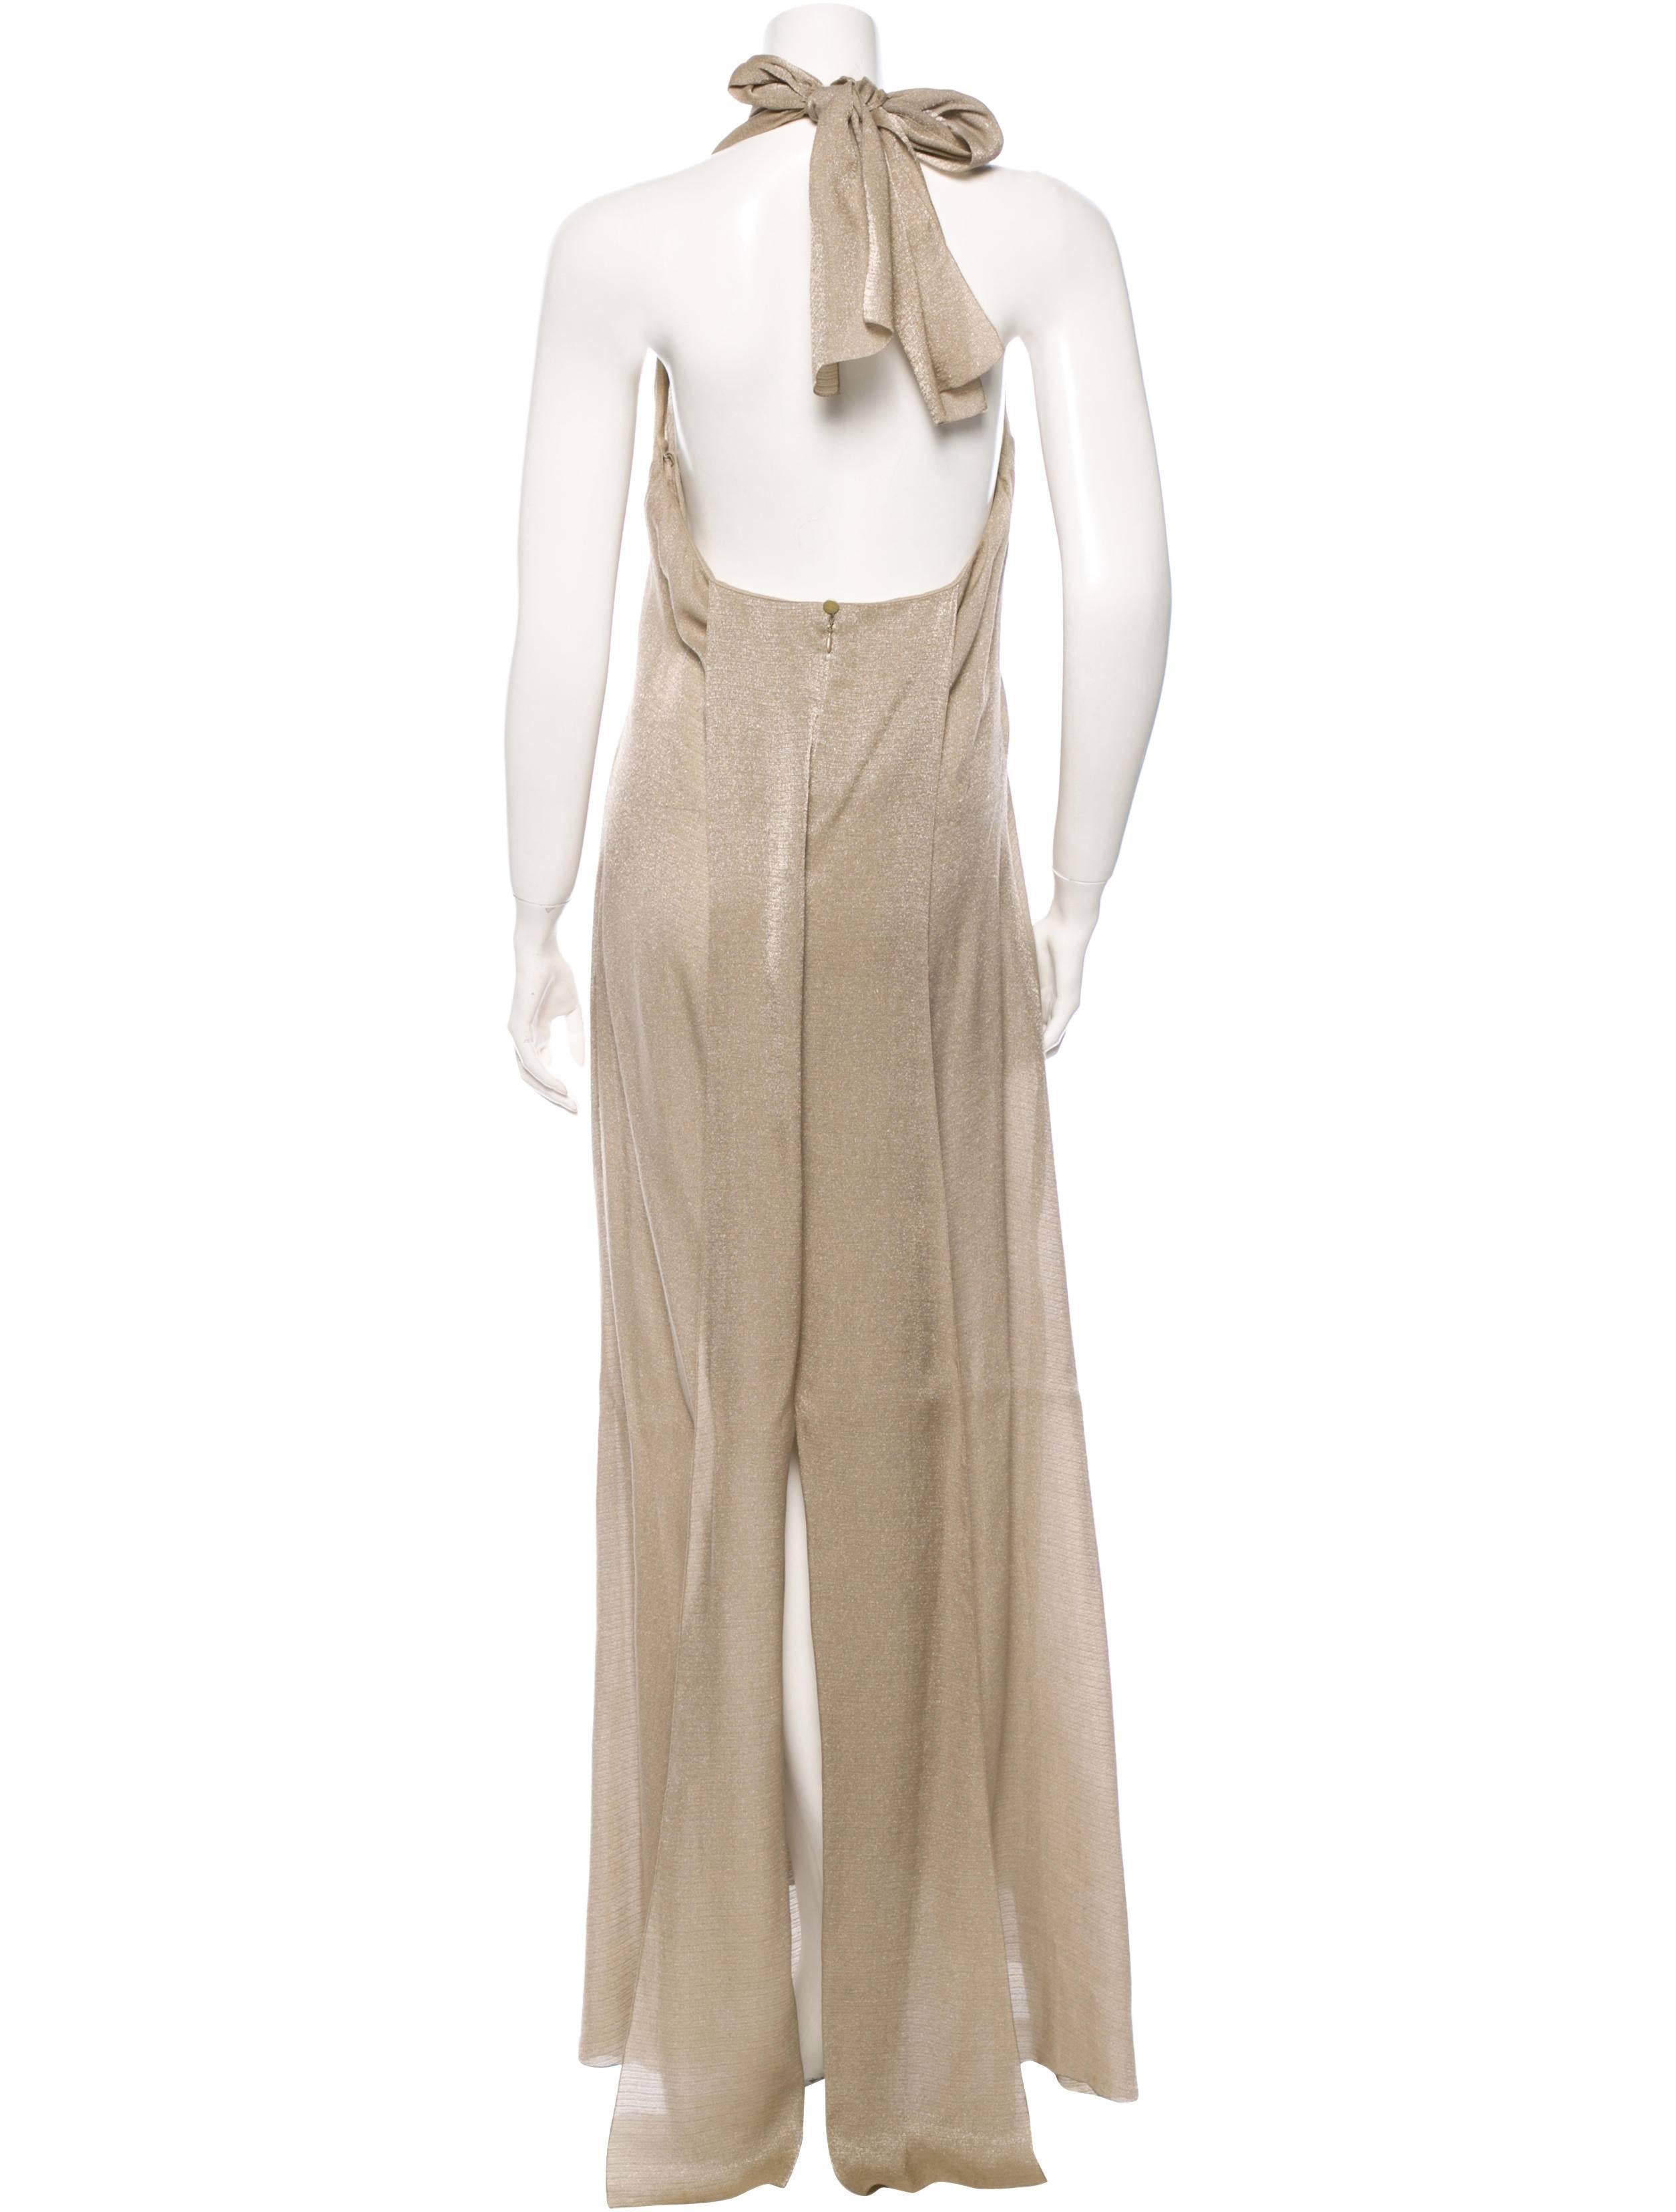 Chanel Vintage Gold Nude Tan Metallic V-Neck Halter Cocktail Evening Dress In Excellent Condition In Chicago, IL